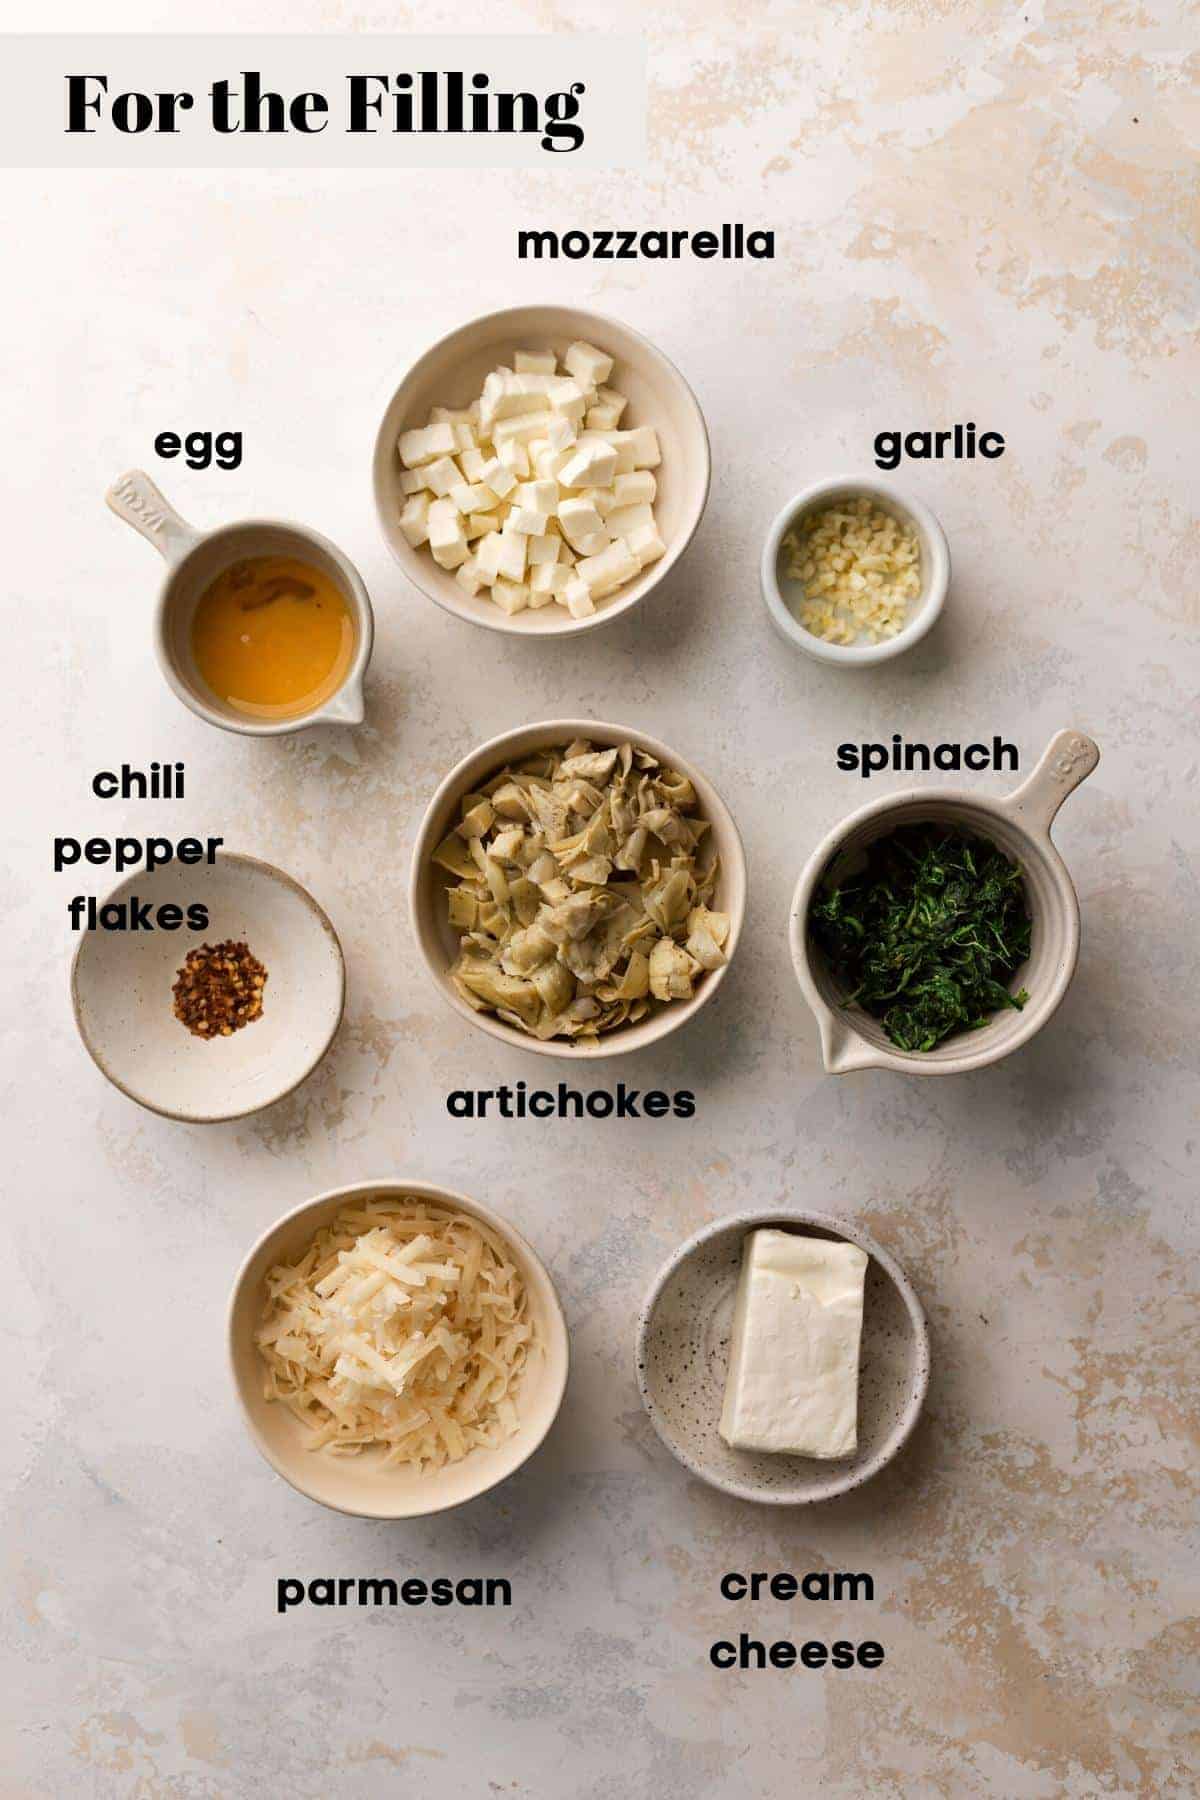 ingredients needed to make the spinach artichoke filling.